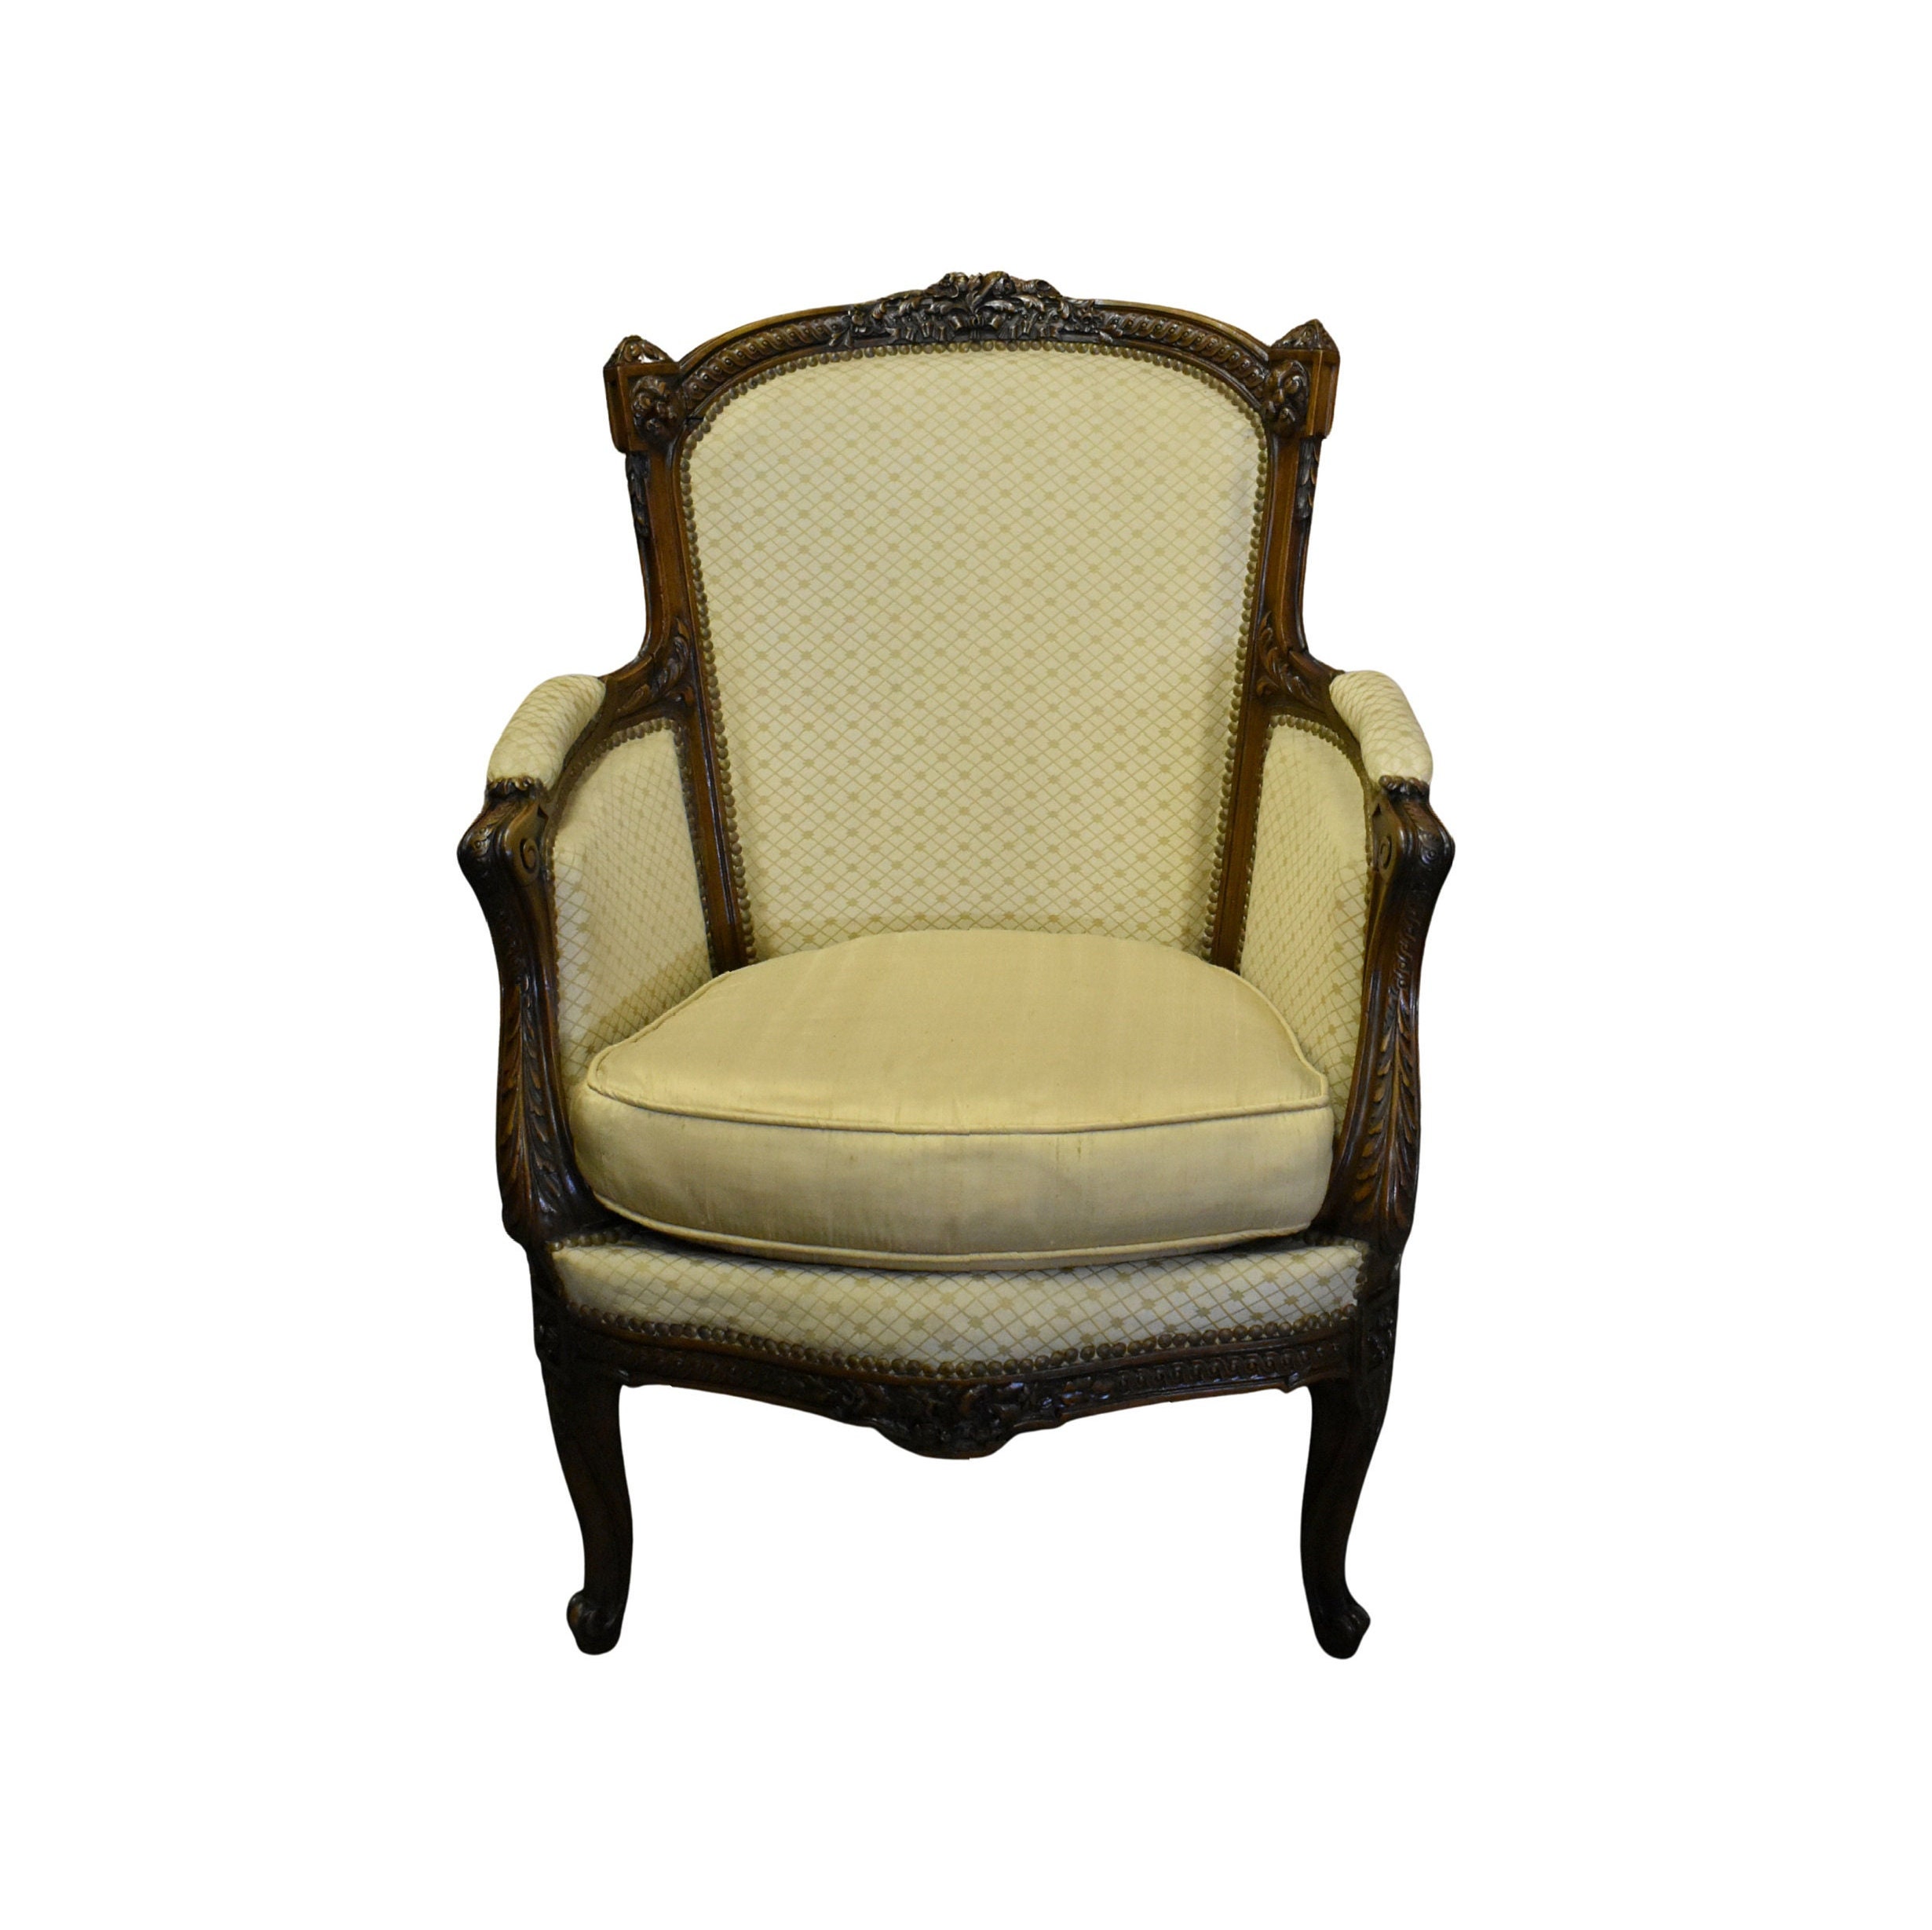 French Louis XV Painted Bergere Chair With Carved Flowers